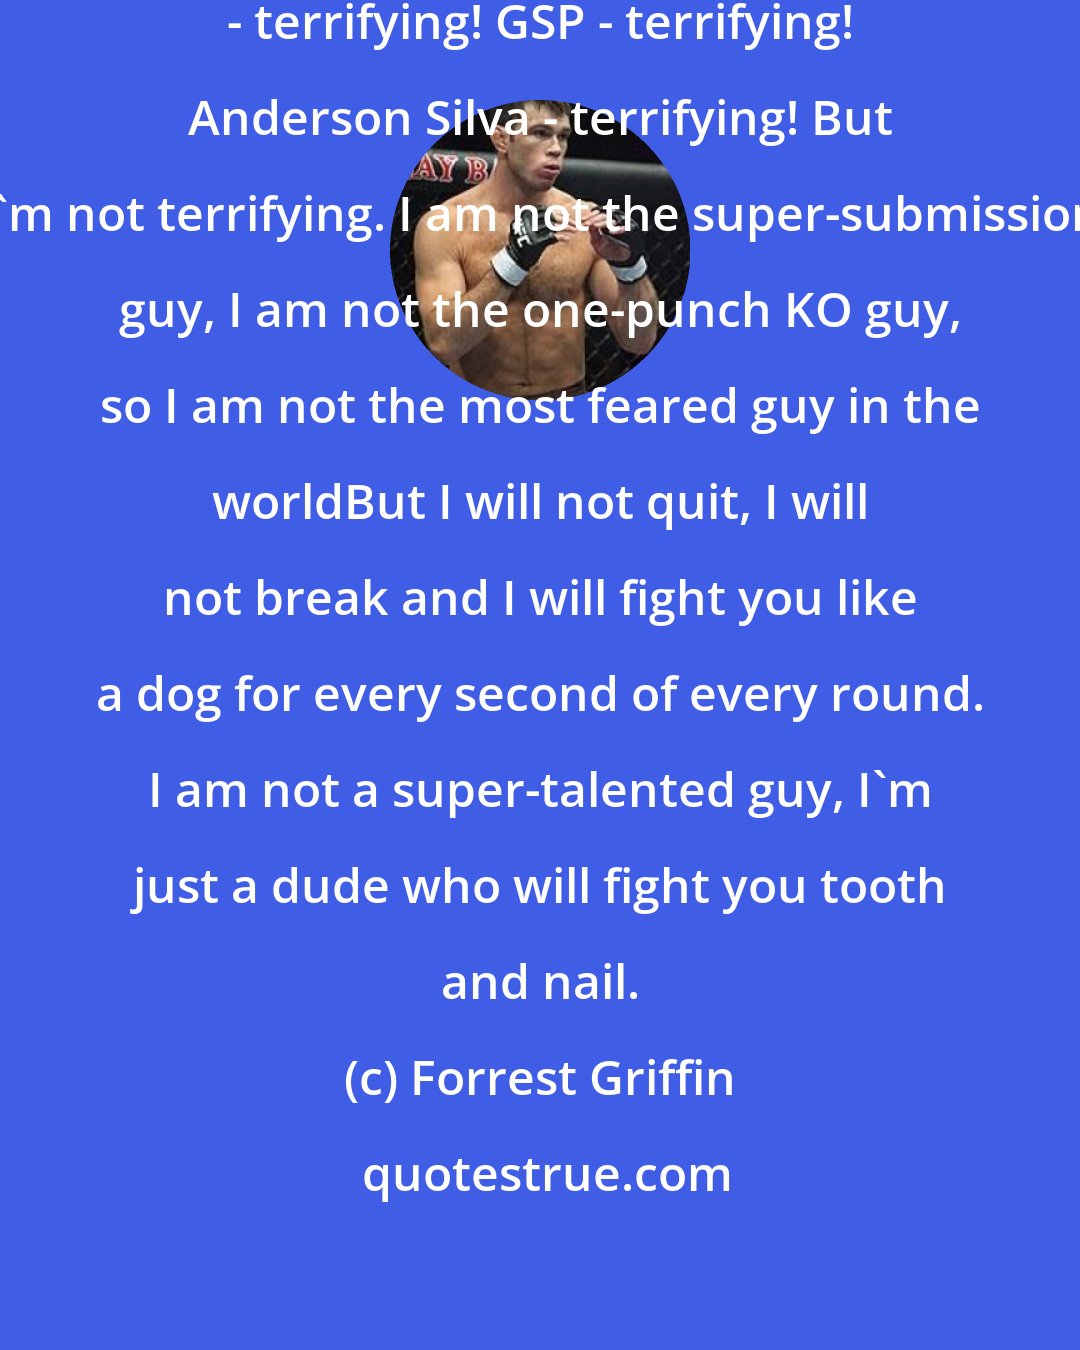 Forrest Griffin: If you look at UFC champions: BJ Penn - terrifying! GSP - terrifying! Anderson Silva - terrifying! But I'm not terrifying. I am not the super-submission guy, I am not the one-punch KO guy, so I am not the most feared guy in the worldBut I will not quit, I will not break and I will fight you like a dog for every second of every round. I am not a super-talented guy, I'm just a dude who will fight you tooth and nail.